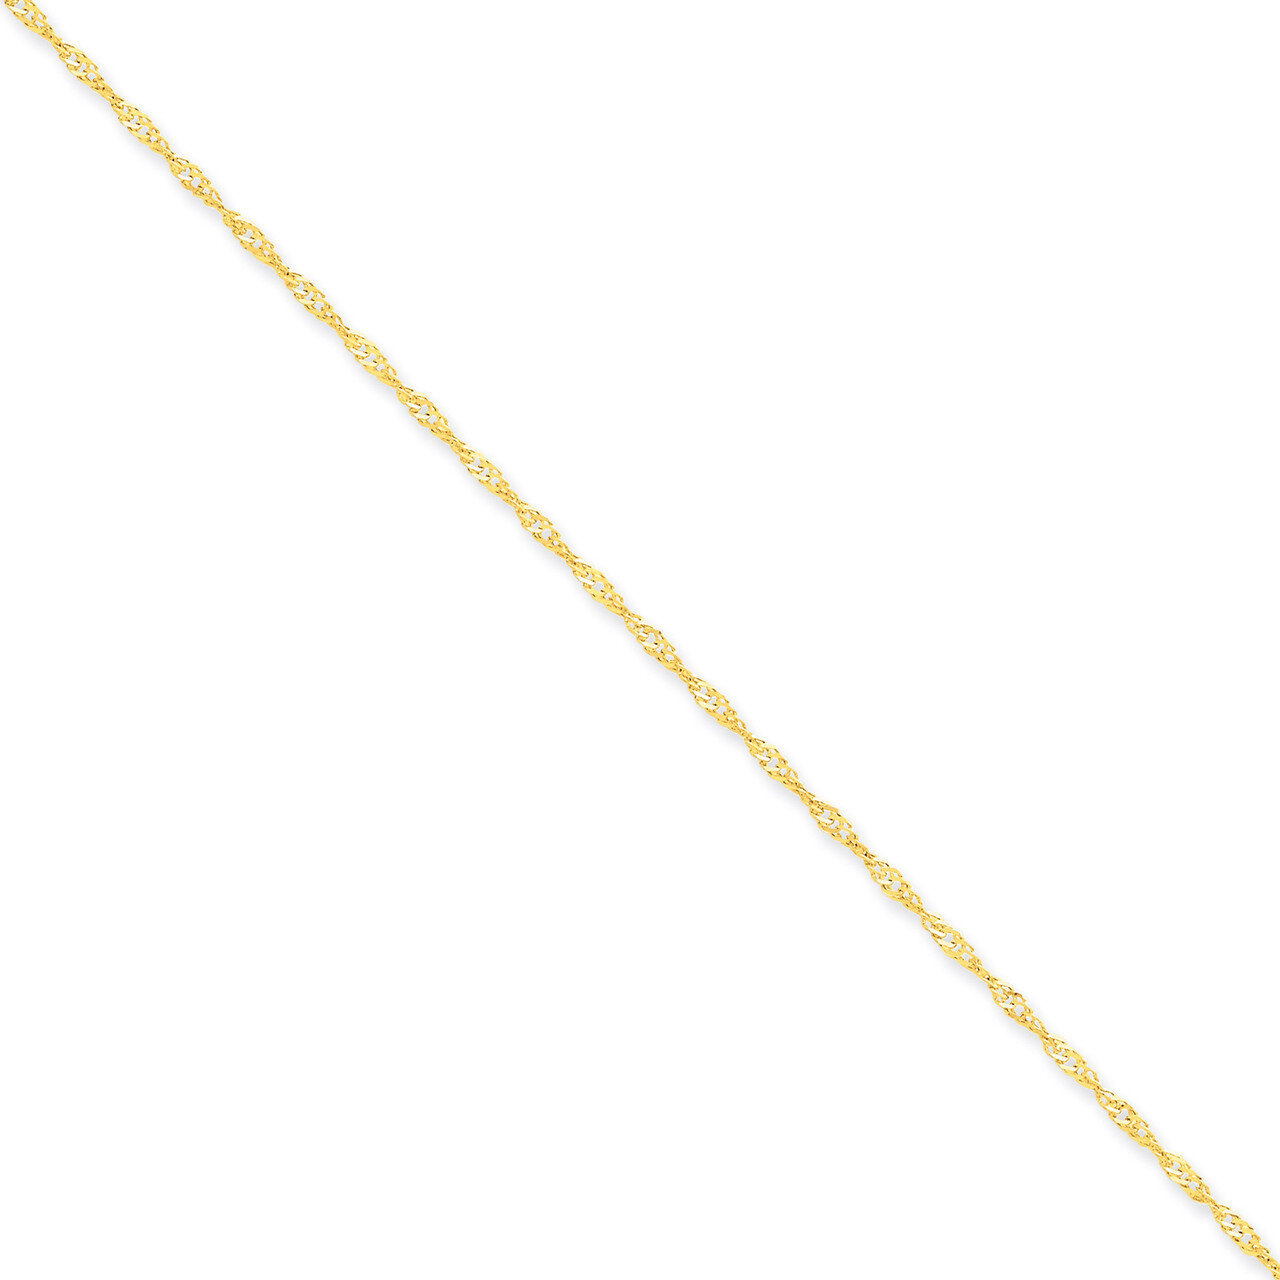 1.6mm Singapore Chain Anklet 10 Inch 14k Gold PEN52-10